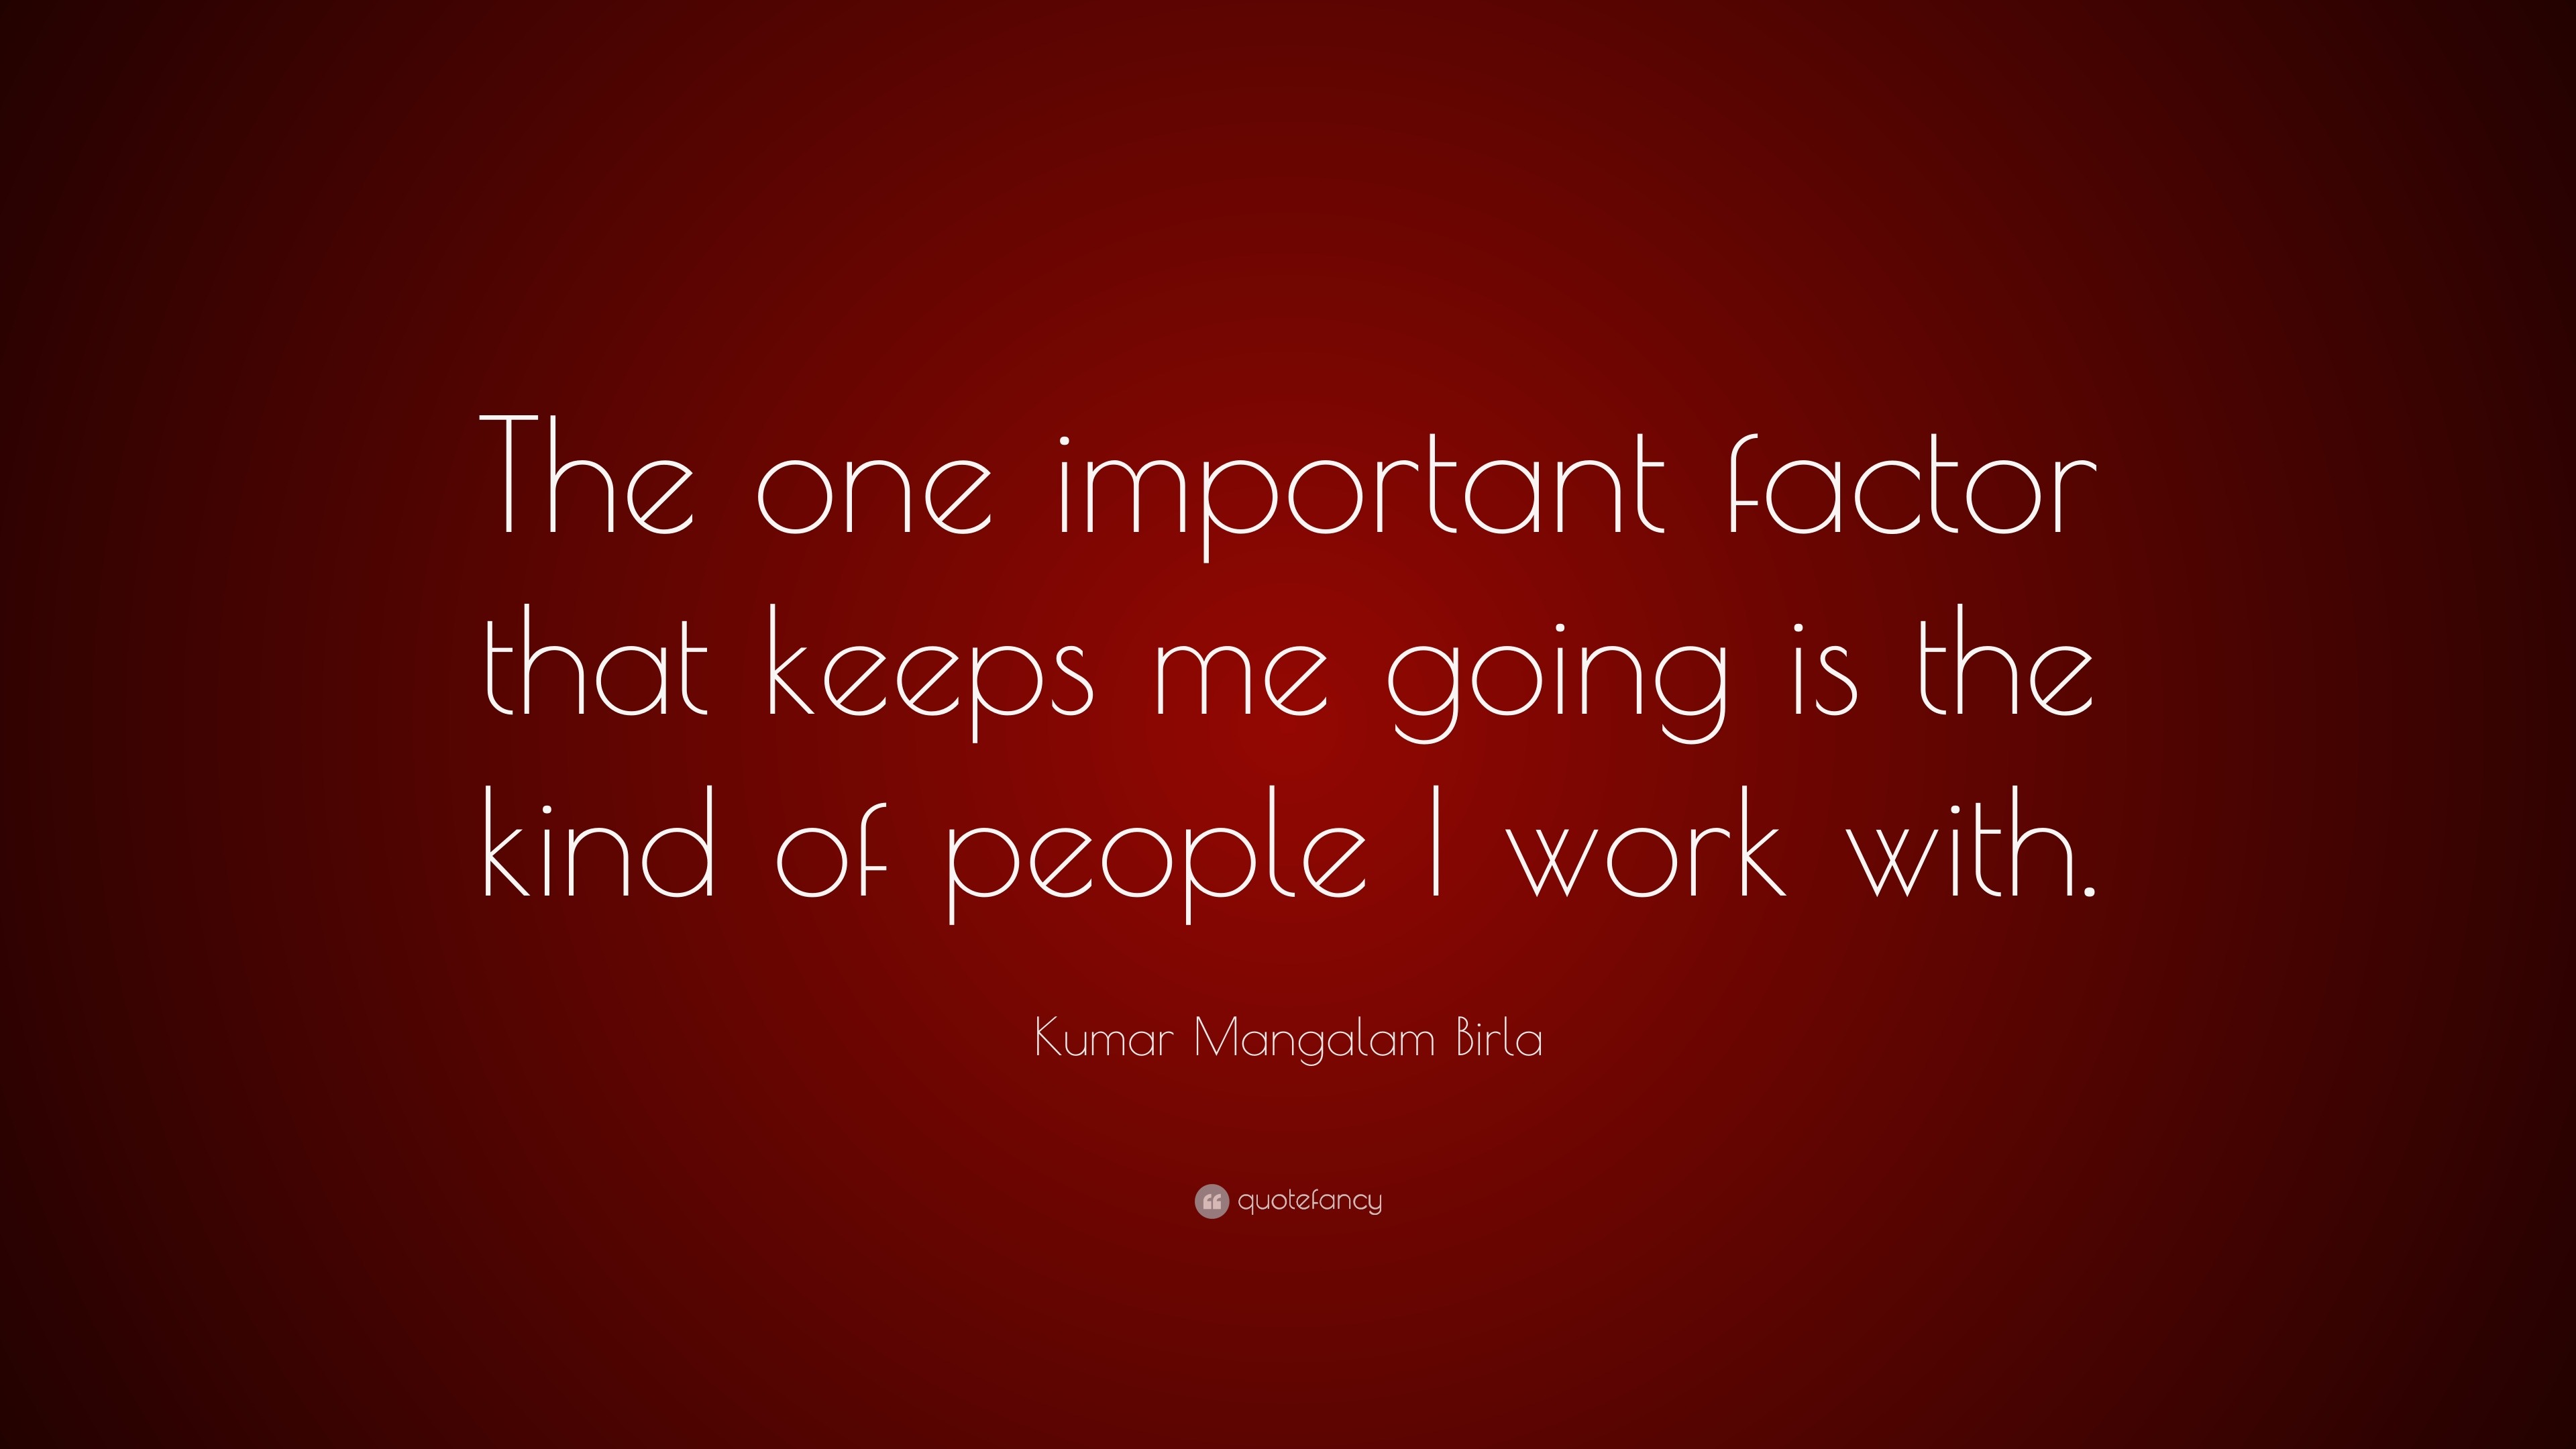 Kumar Mangalam Birla Quote: “The one important factor that keeps me